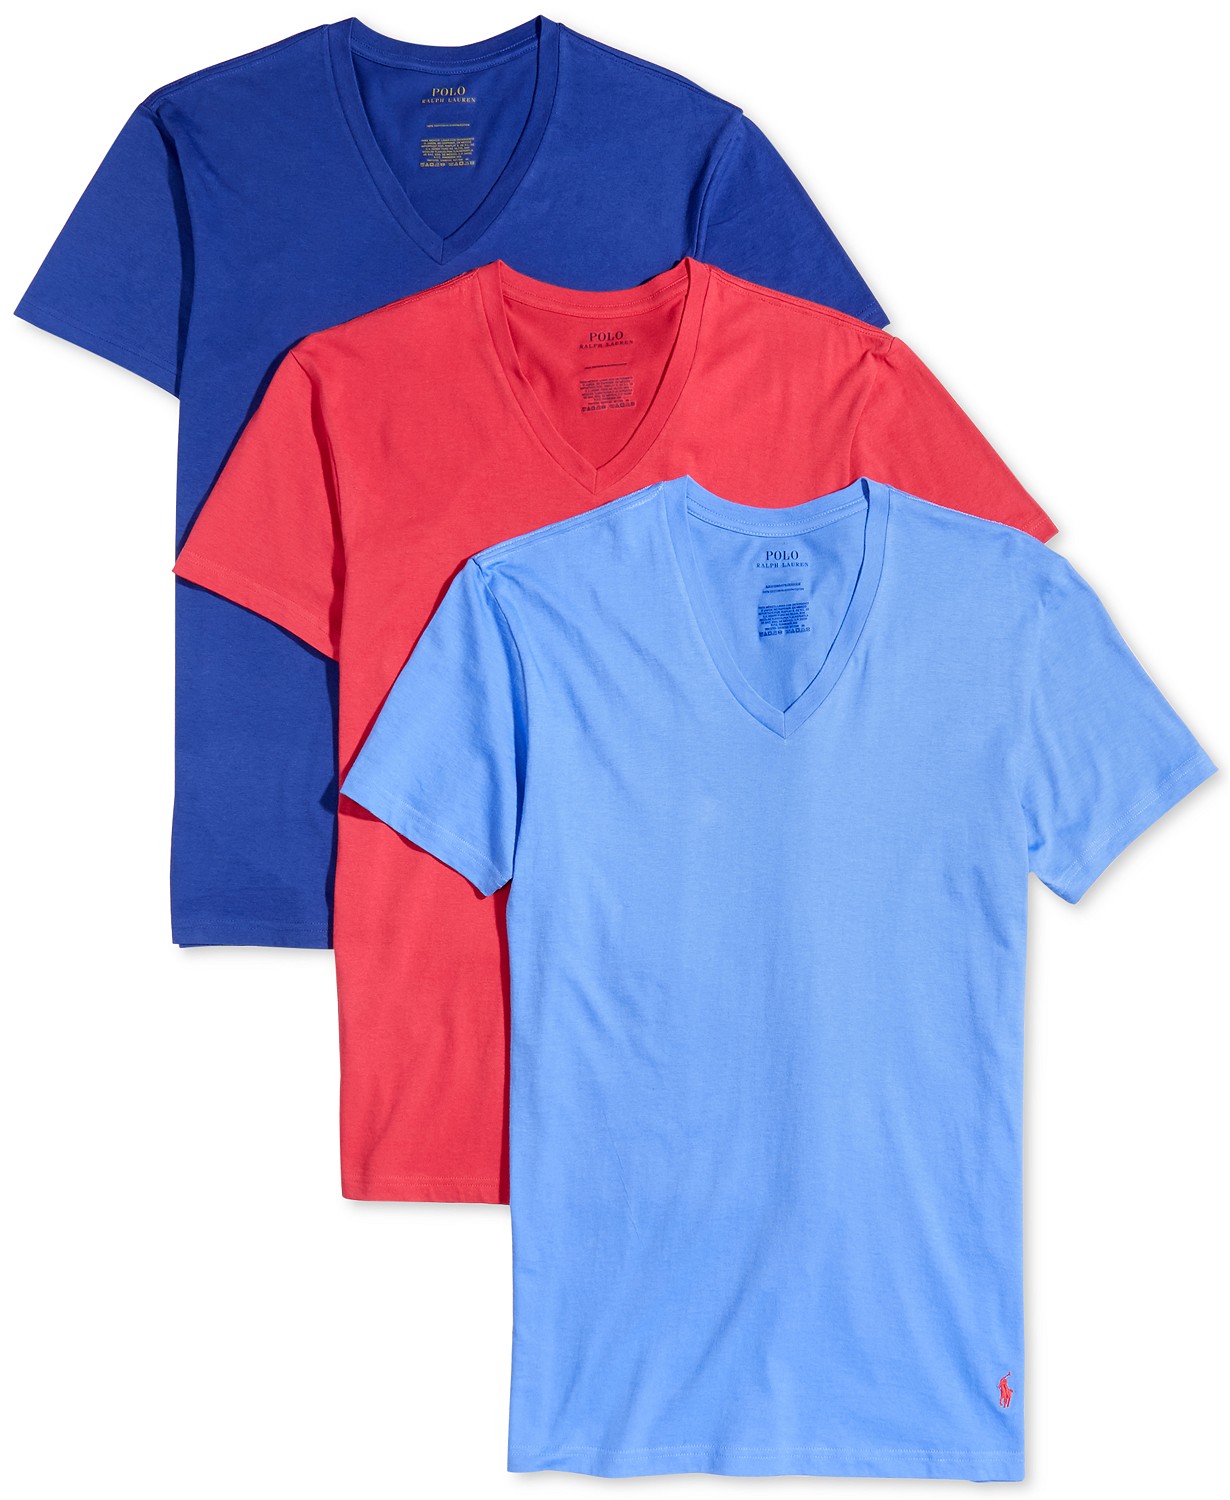 Normally $40, this 3-pack of shirts is 55 percent off with code PREVIEW (Photo via Macy's)